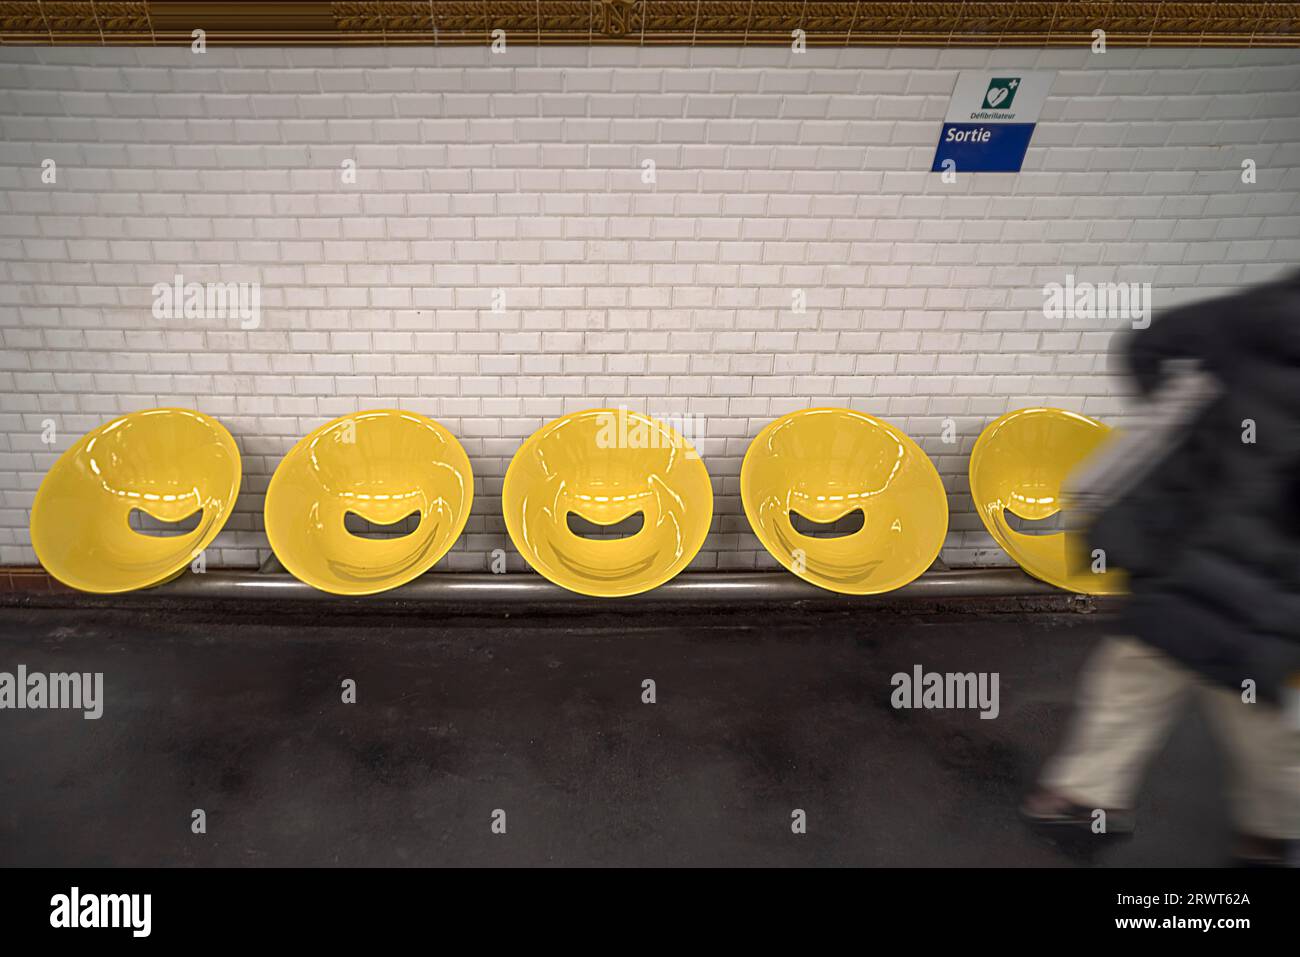 Yellow bucket seats in a Métro station, Paris, France, Europe Stock Photo